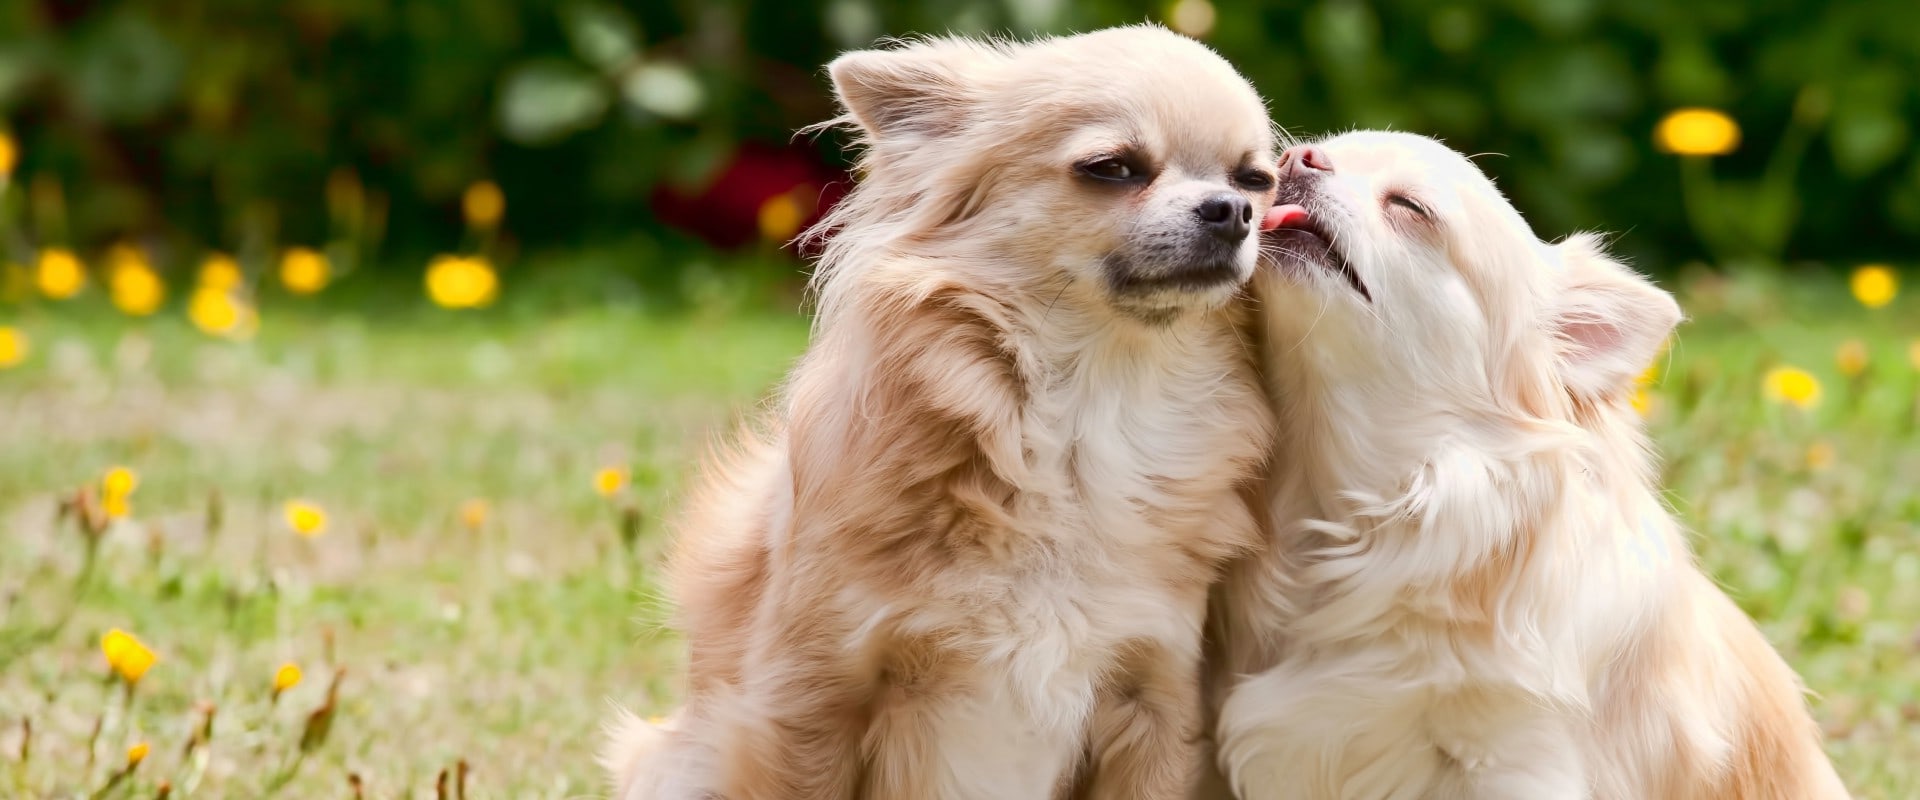 The Top Low-Maintenance Dog Breeds for Busy Owners